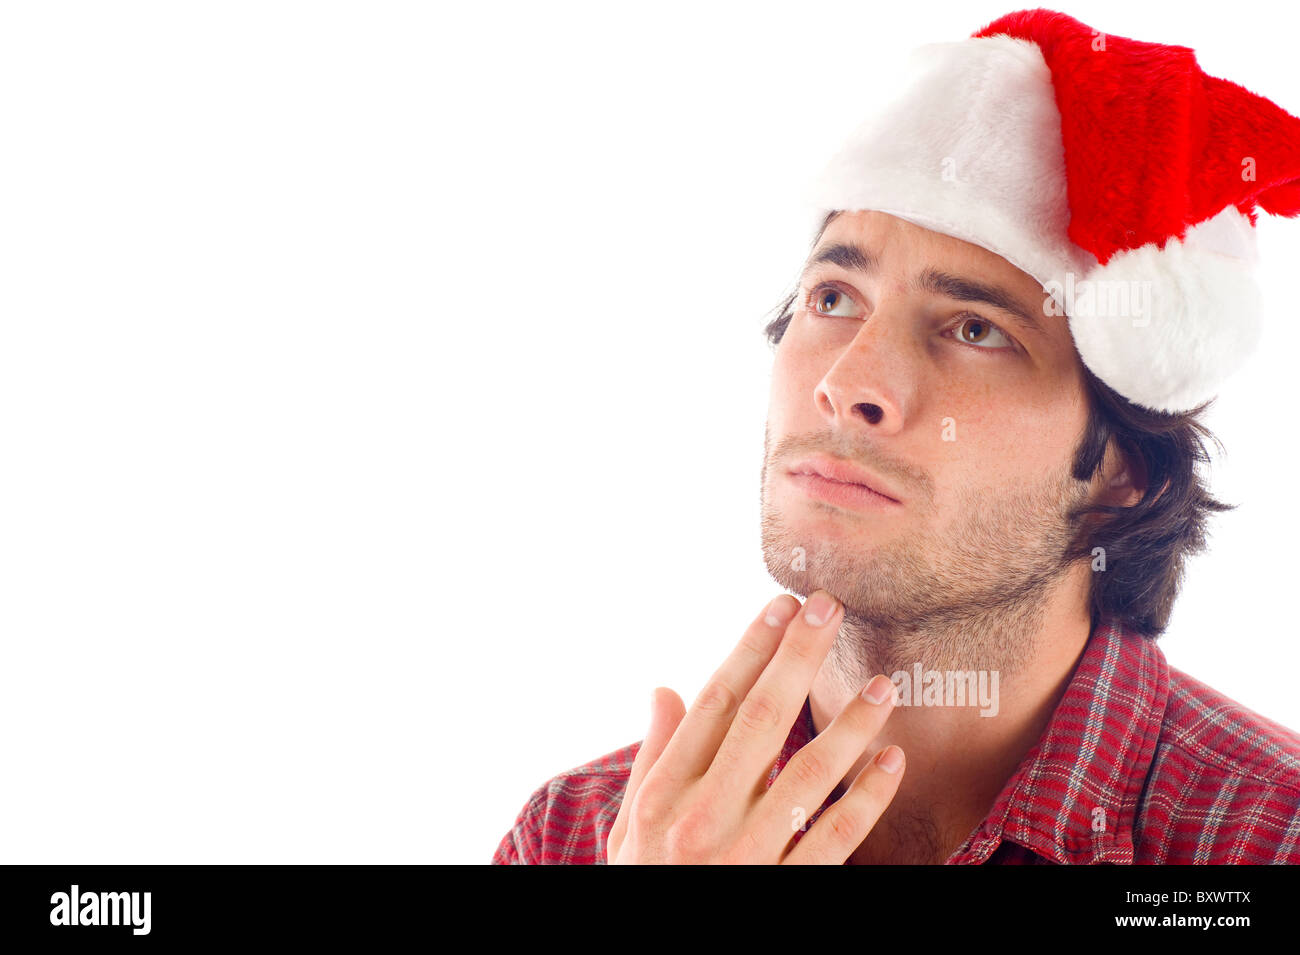 Smiling Man with Christmas Red Hat Looking Pensive -Isolated over a white background Stock Photo